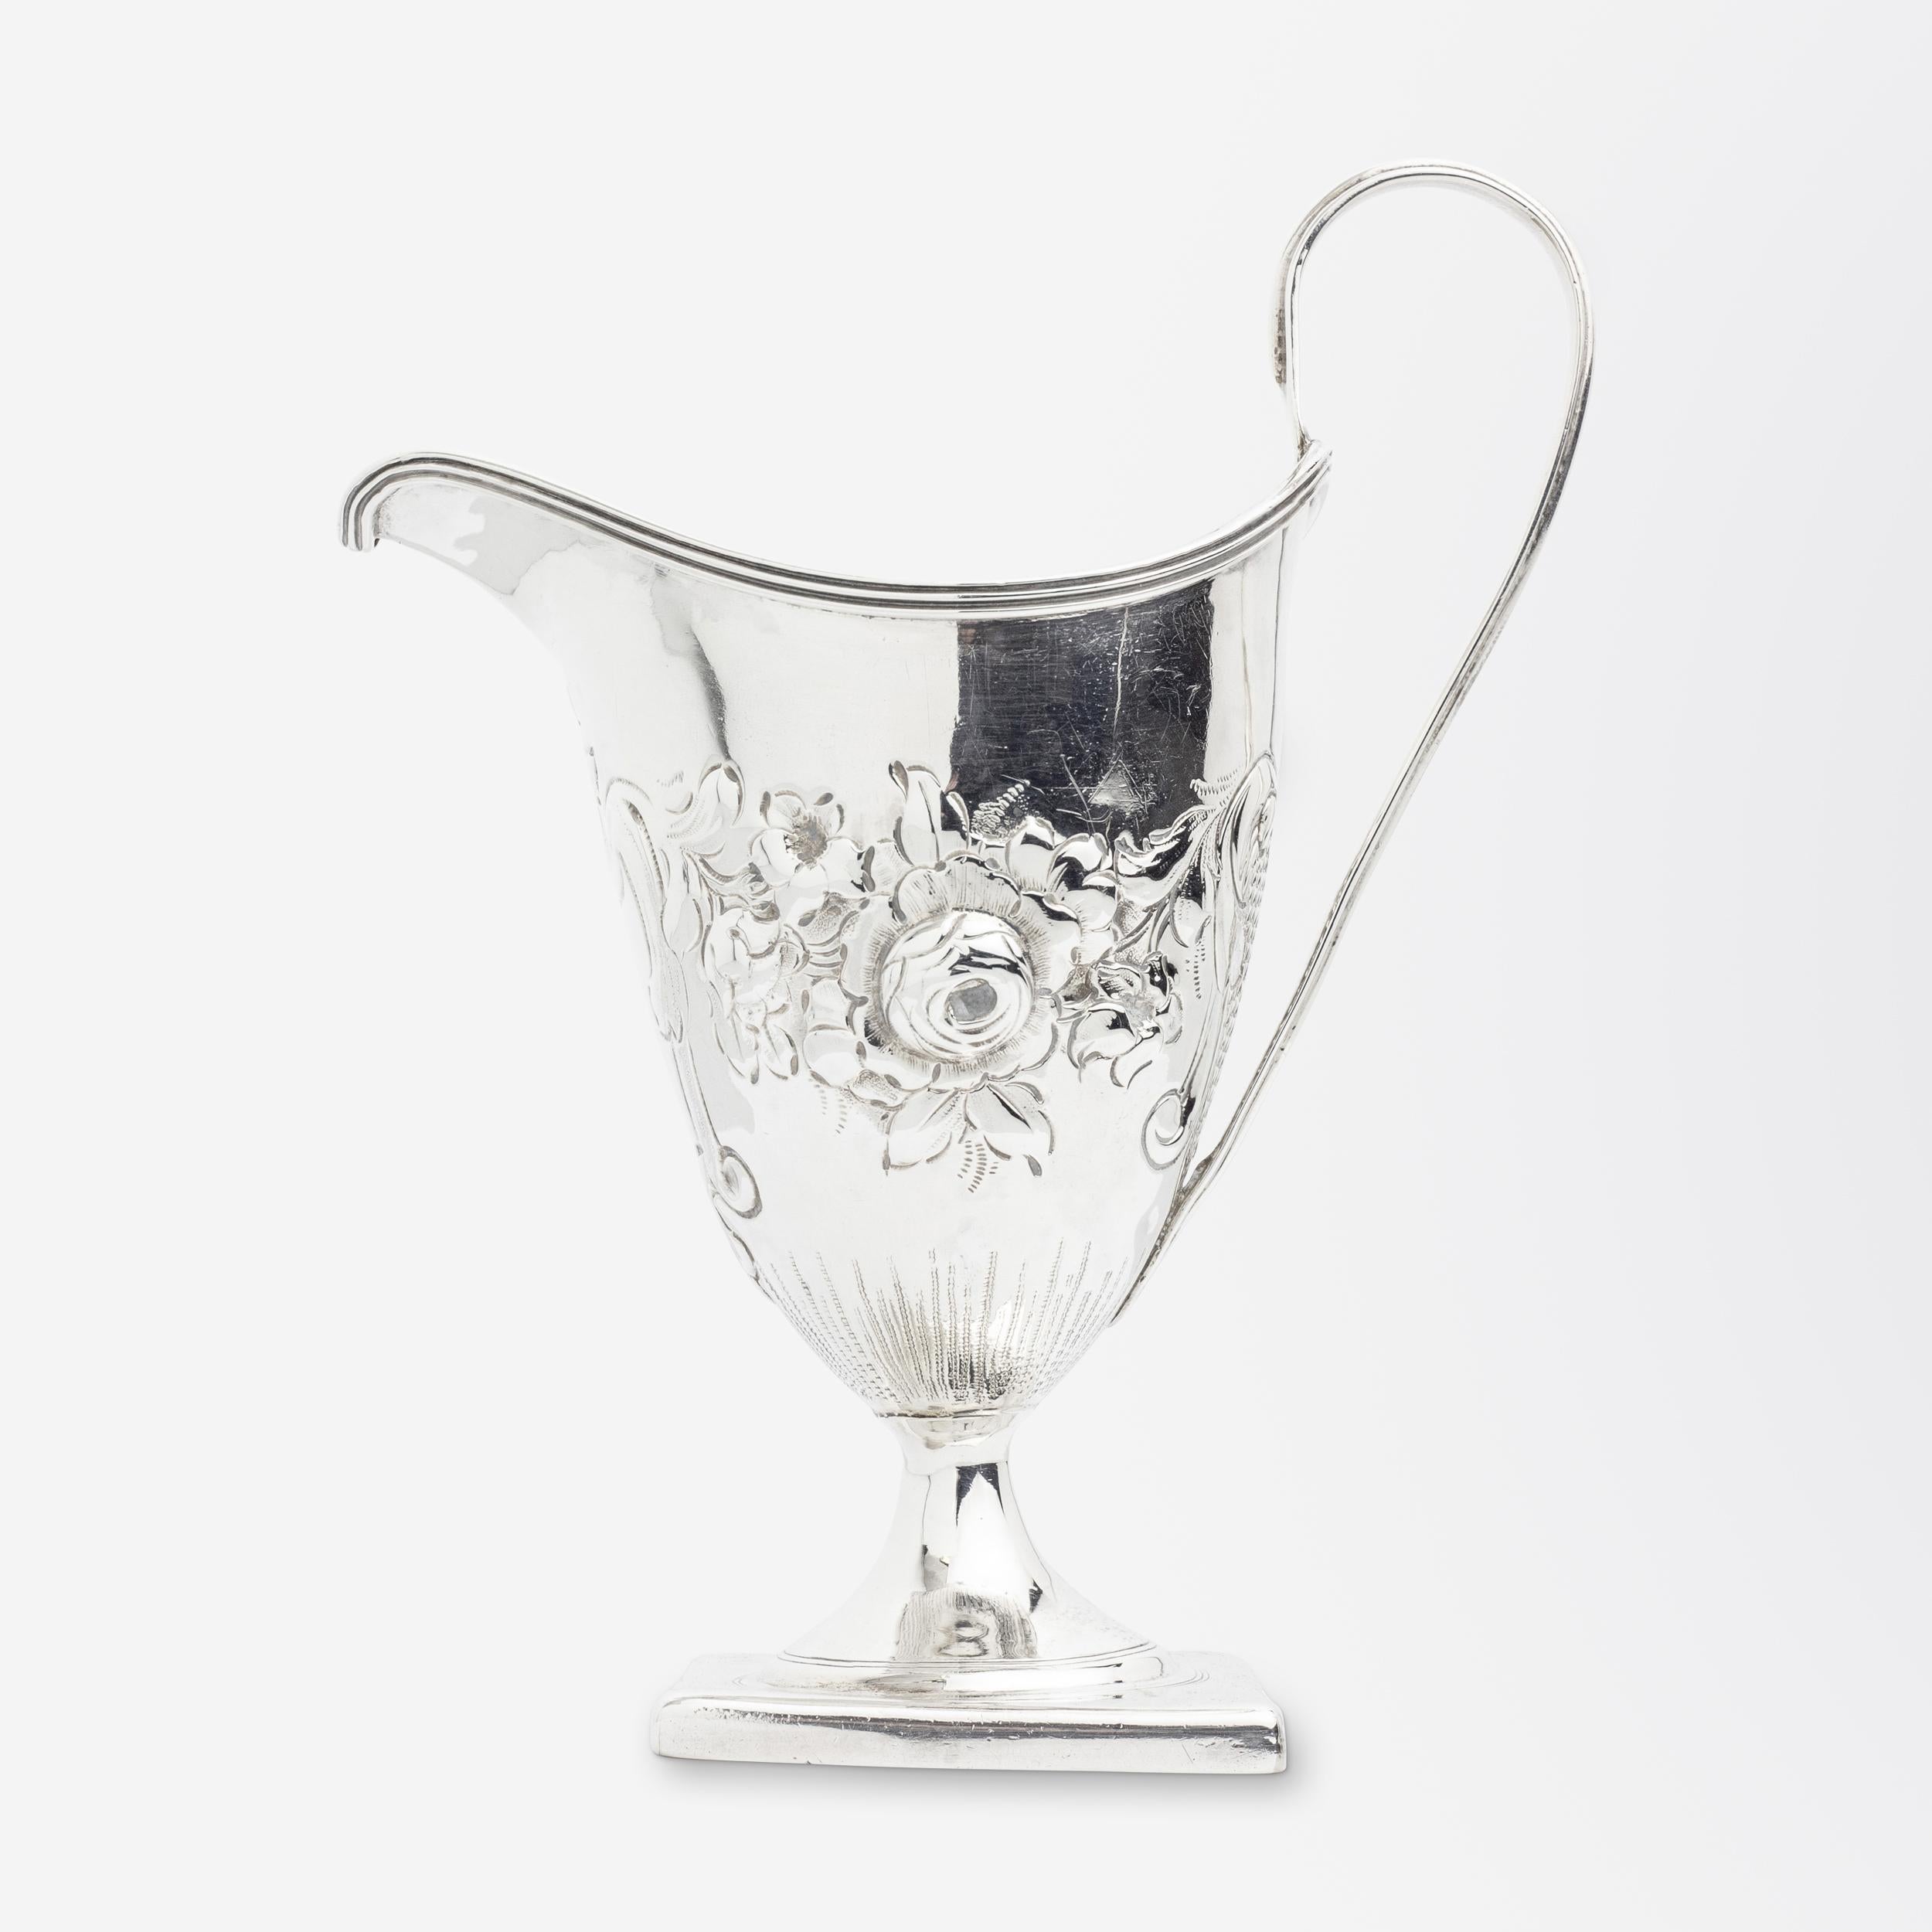 A George III period sterling silver creamer with floral repousse design to the body above a square base by Peter & Ann Bateman. To the centre of the creamer under the spout is a blank crest which is unusual for the Georgian period where the majority